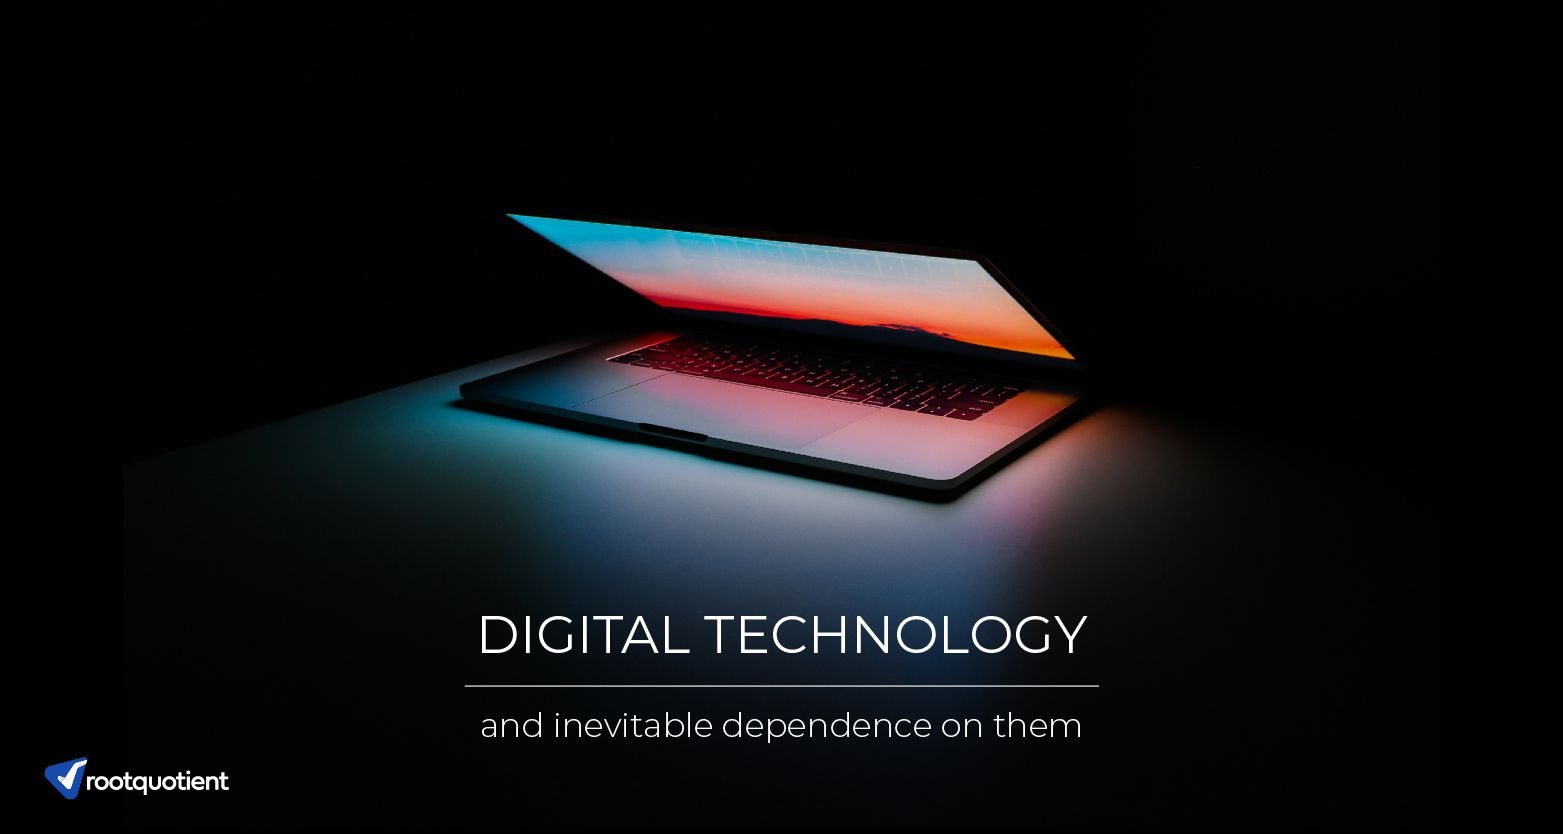 Digital Technology & the Inevitable Dependence on them